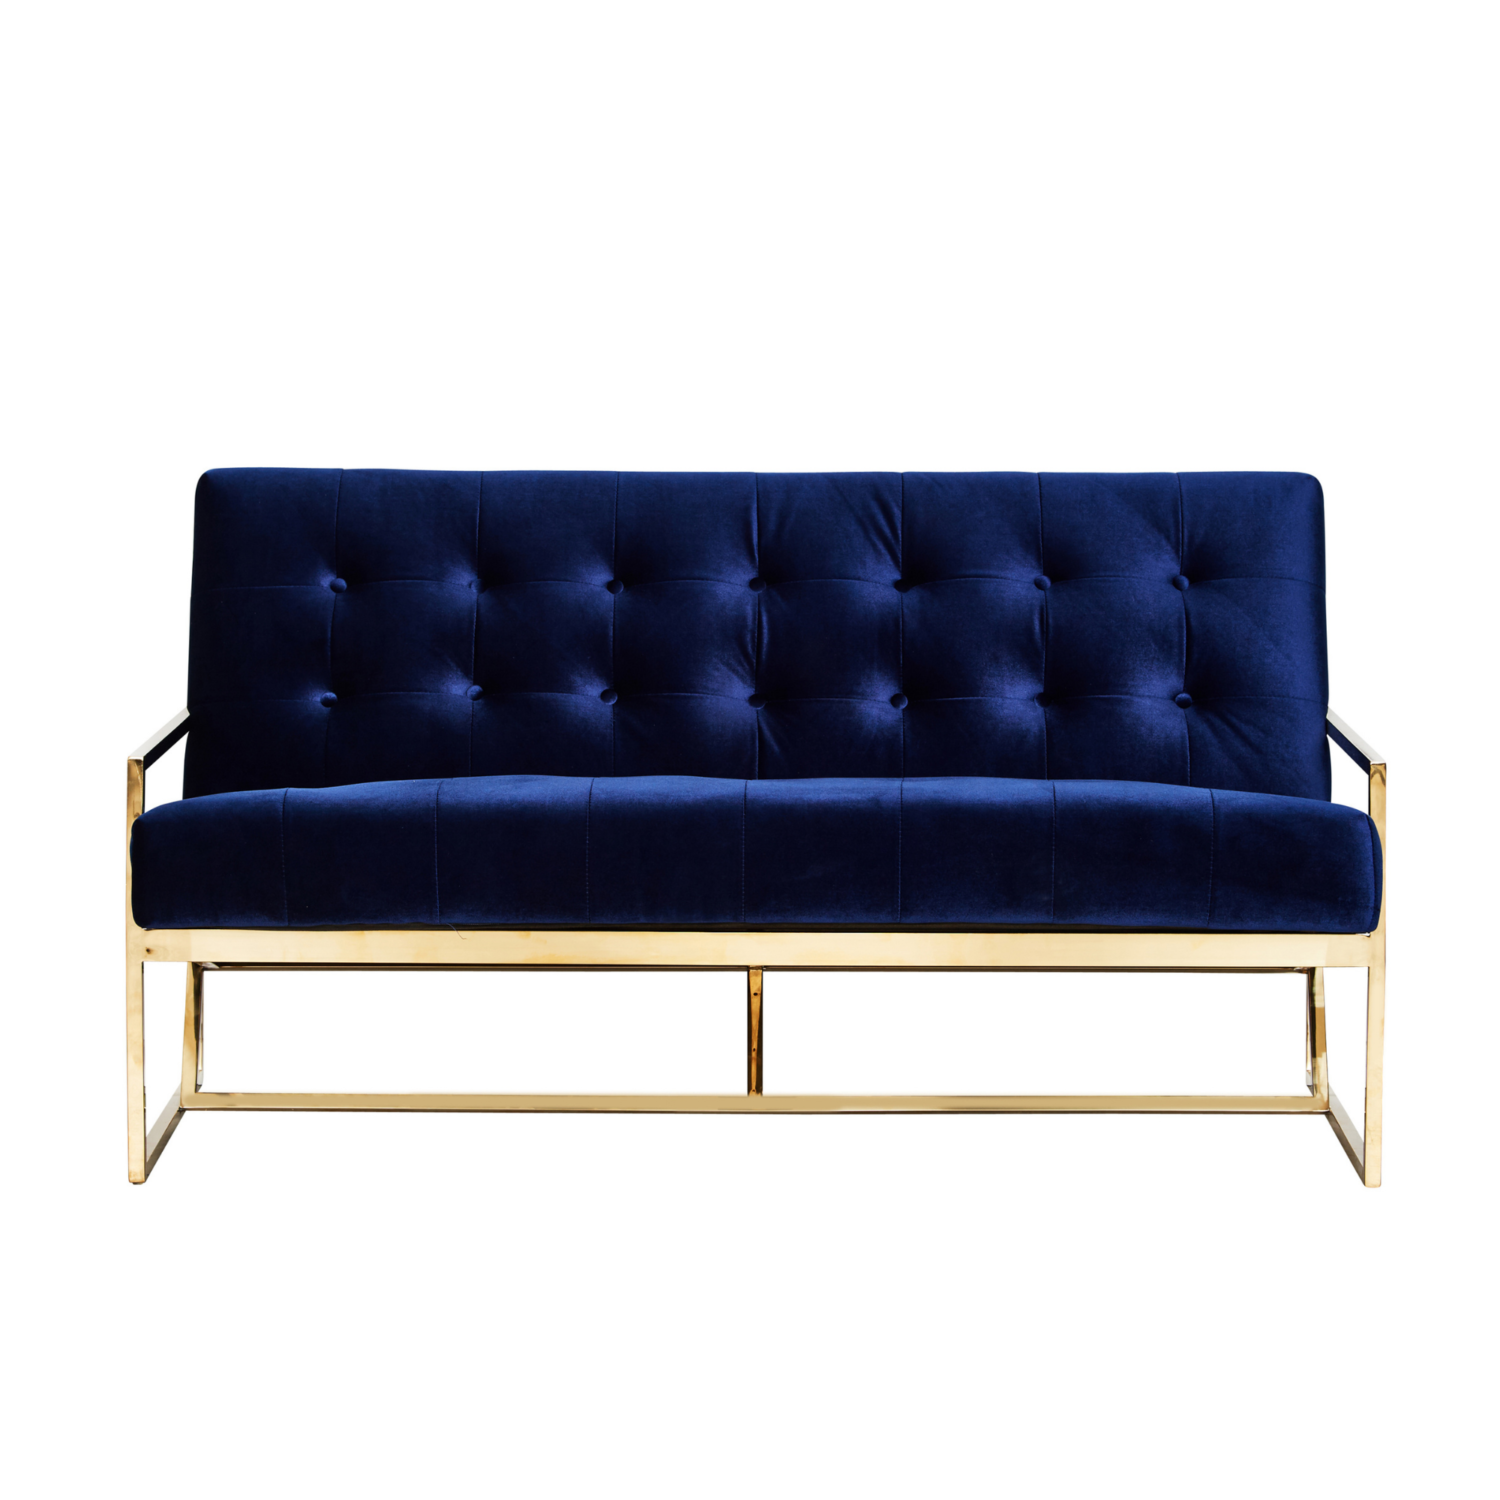 Starlet Two Seater Sofa - Navy / Gold Frame - Event Artillery